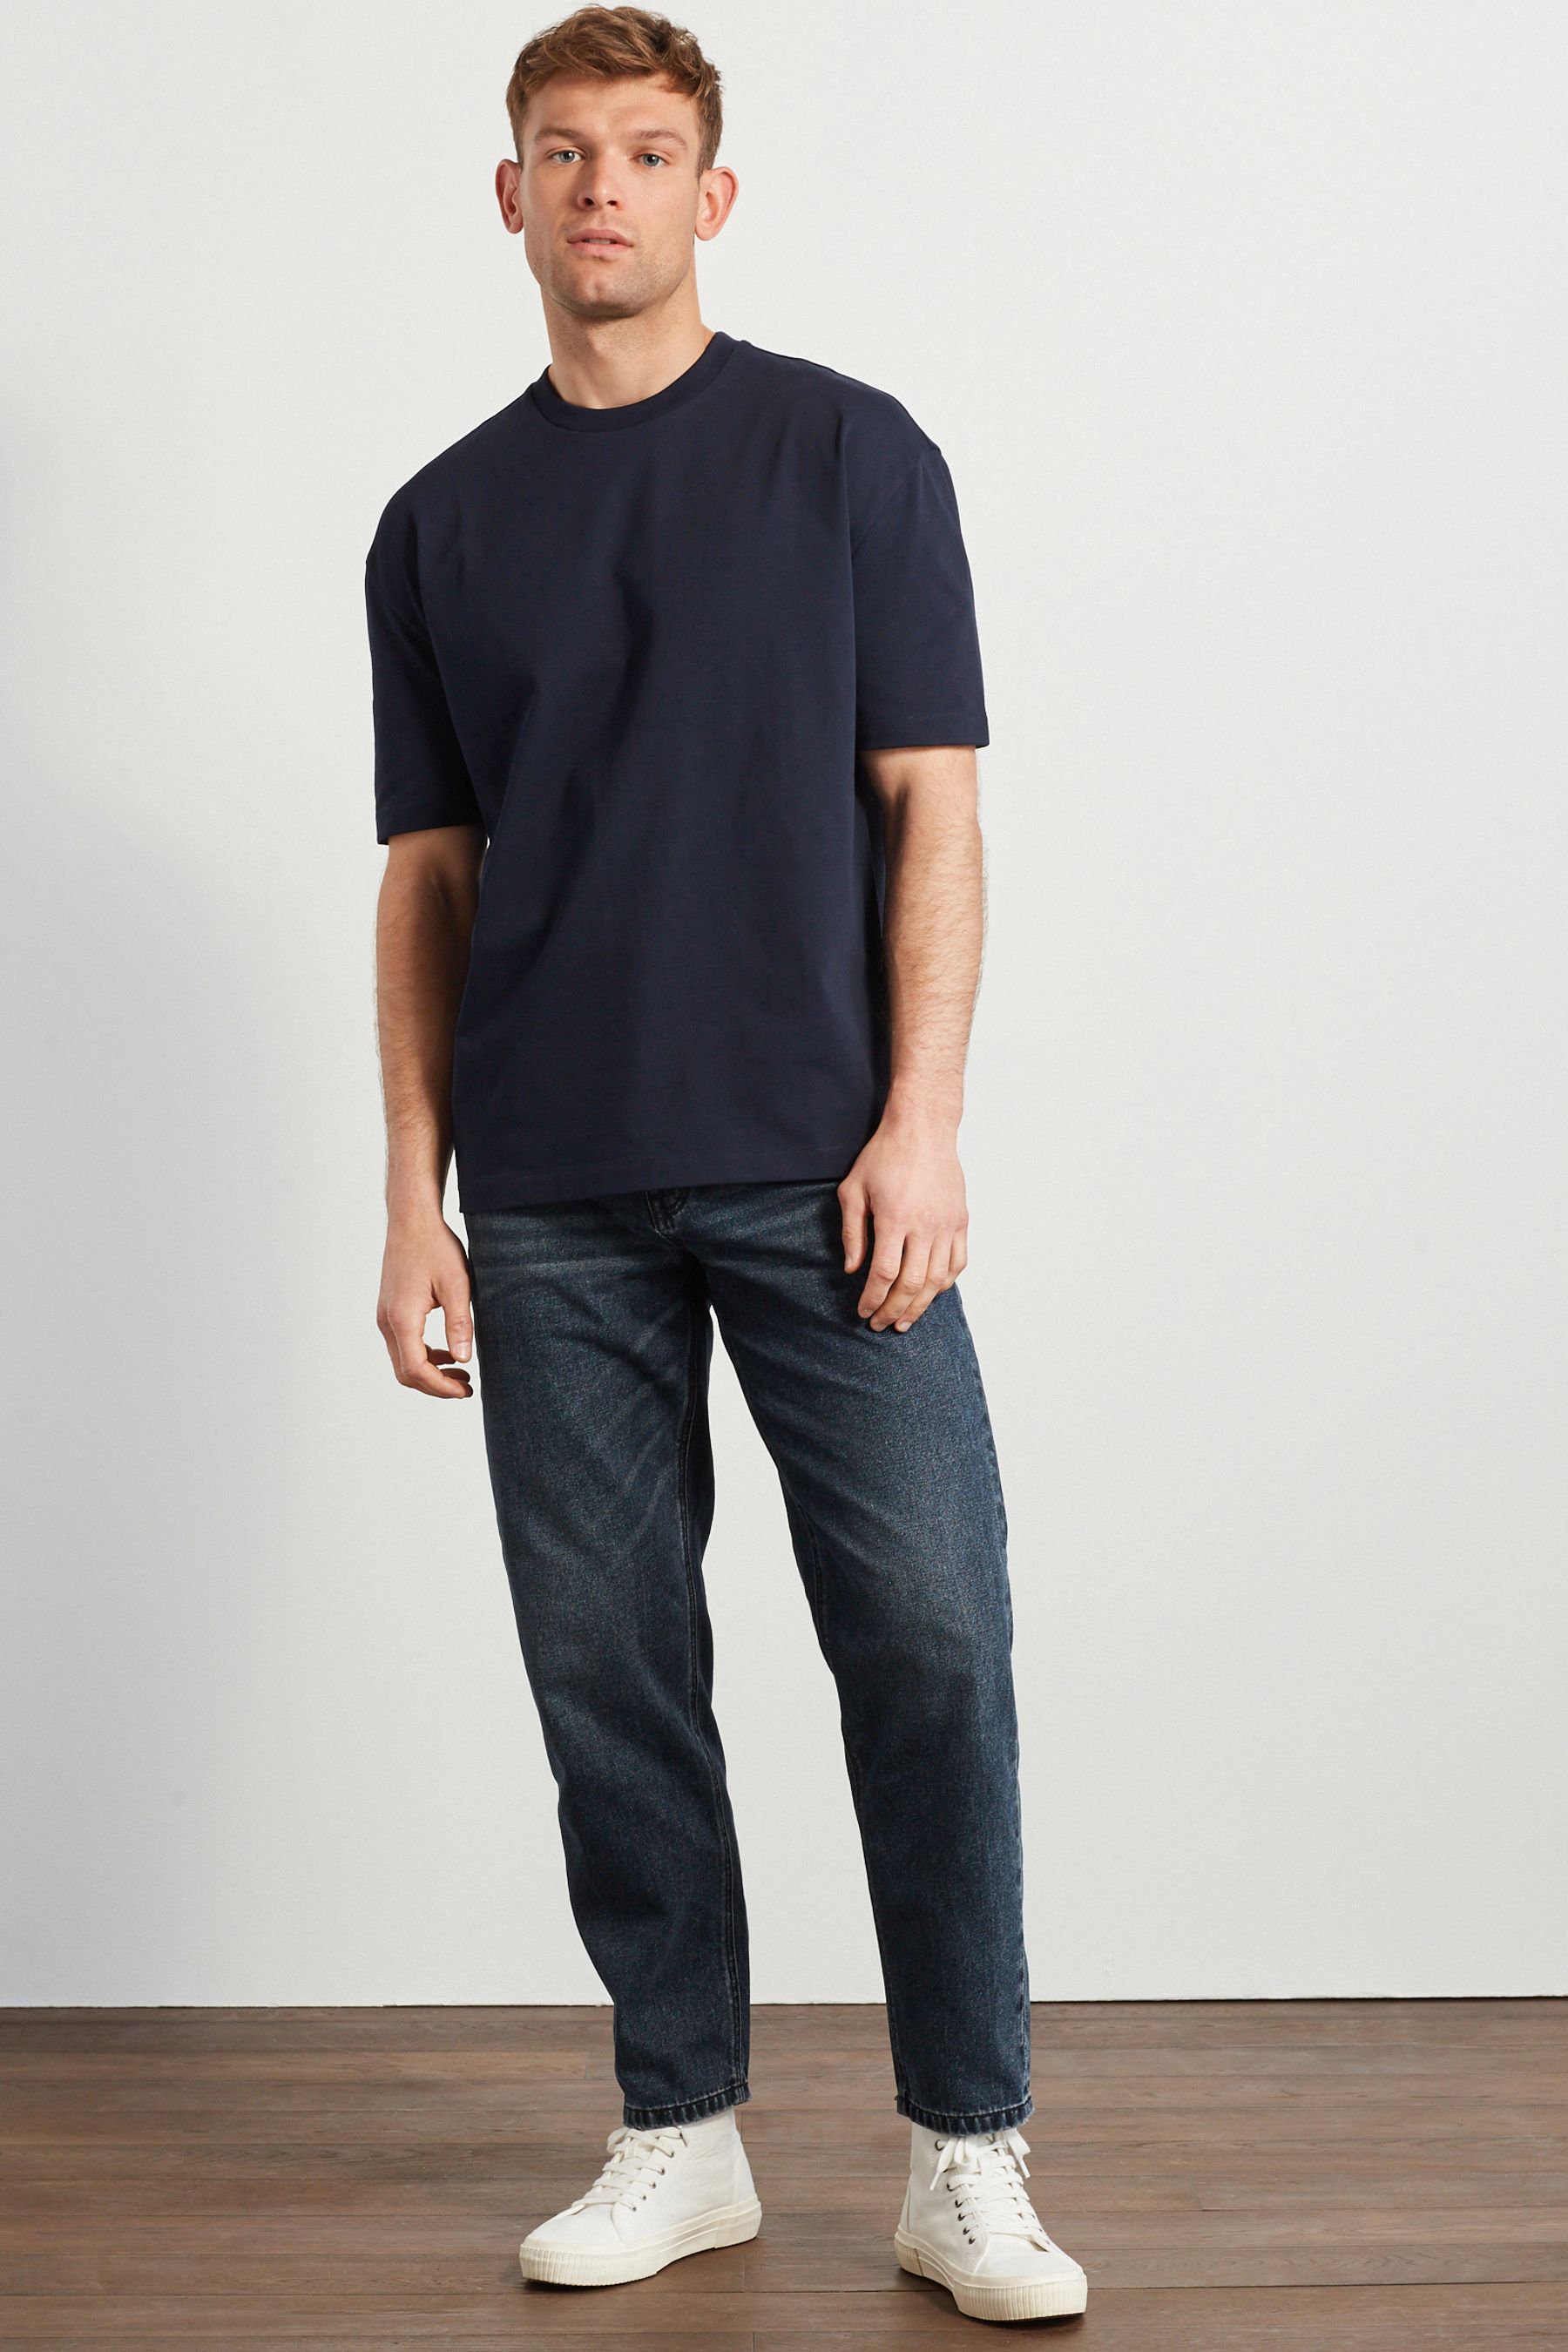 Buy Navy Blue Relaxed Fit Heavyweight T-Shirt from the Next UK online shop